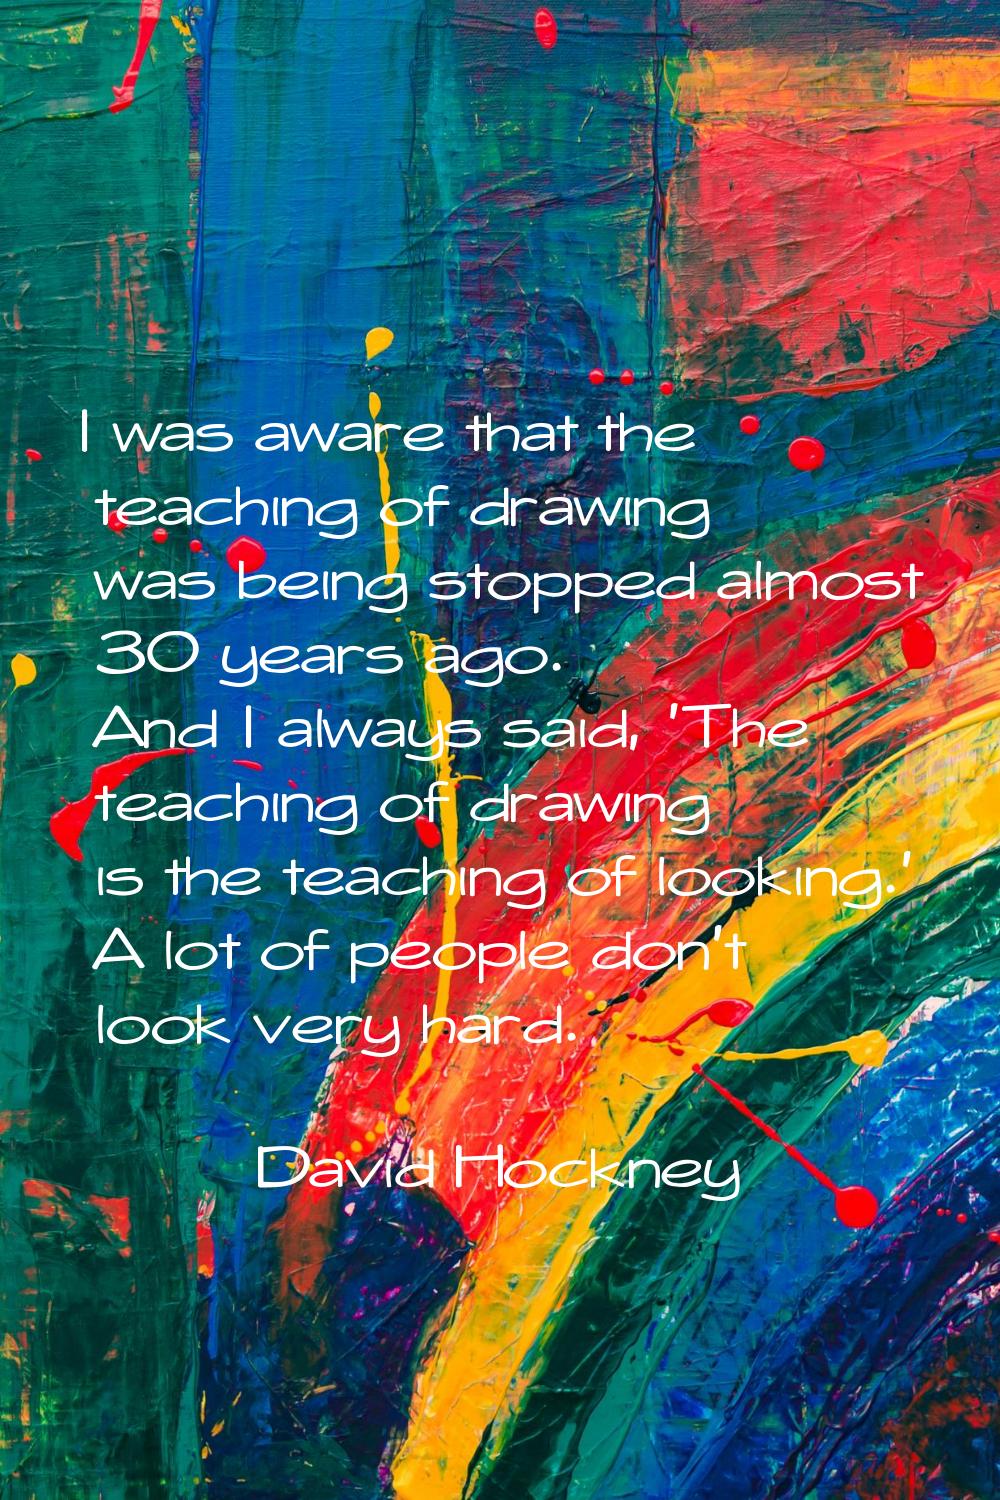 I was aware that the teaching of drawing was being stopped almost 30 years ago. And I always said, 